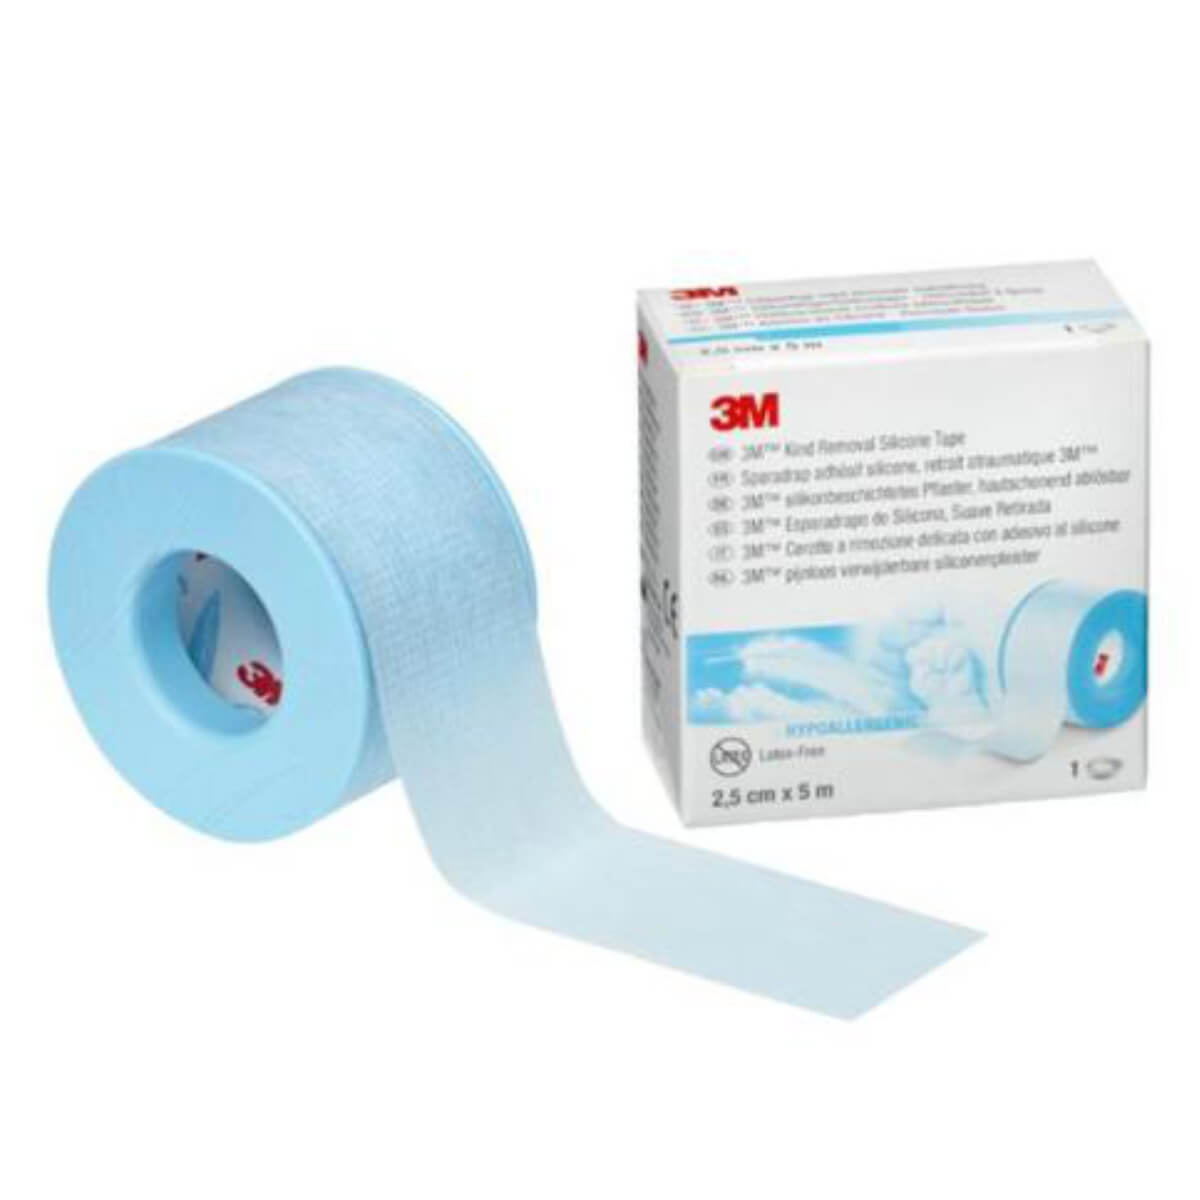 Nucleair als je kunt Ondergedompeld 3M Silicone Tape Roll Gips | DocCheck Shop